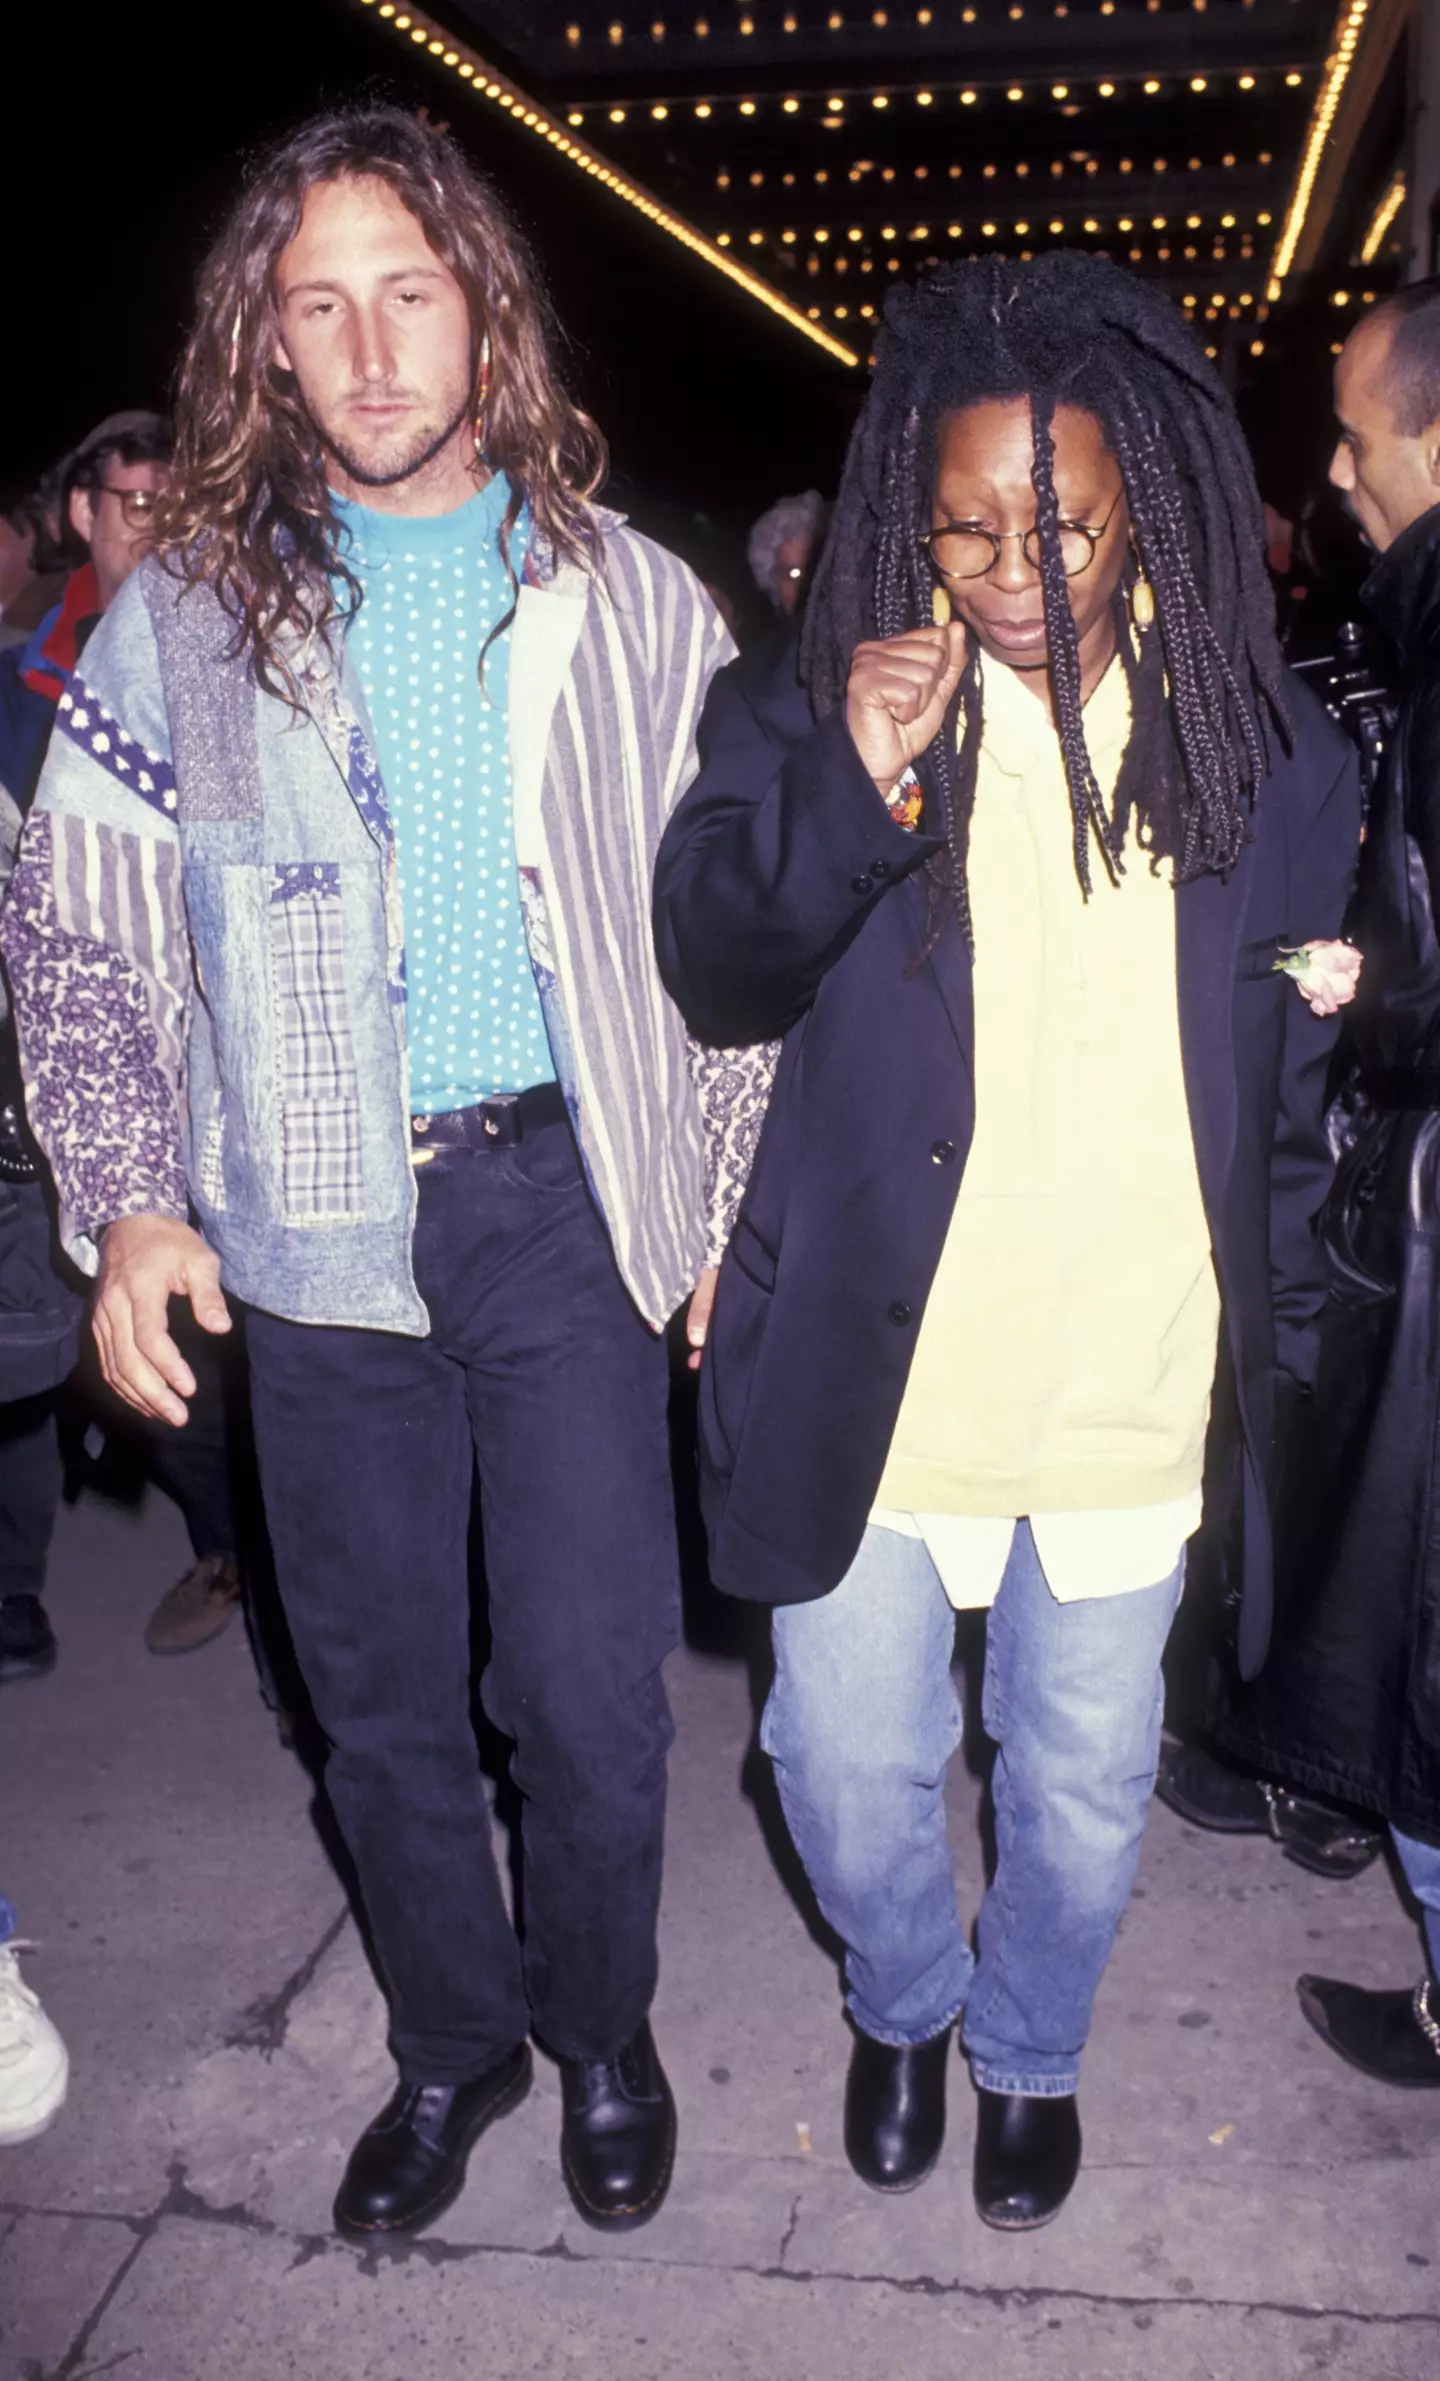 Whoopi and her third husband, union organizer Lyle Trachtenberg.